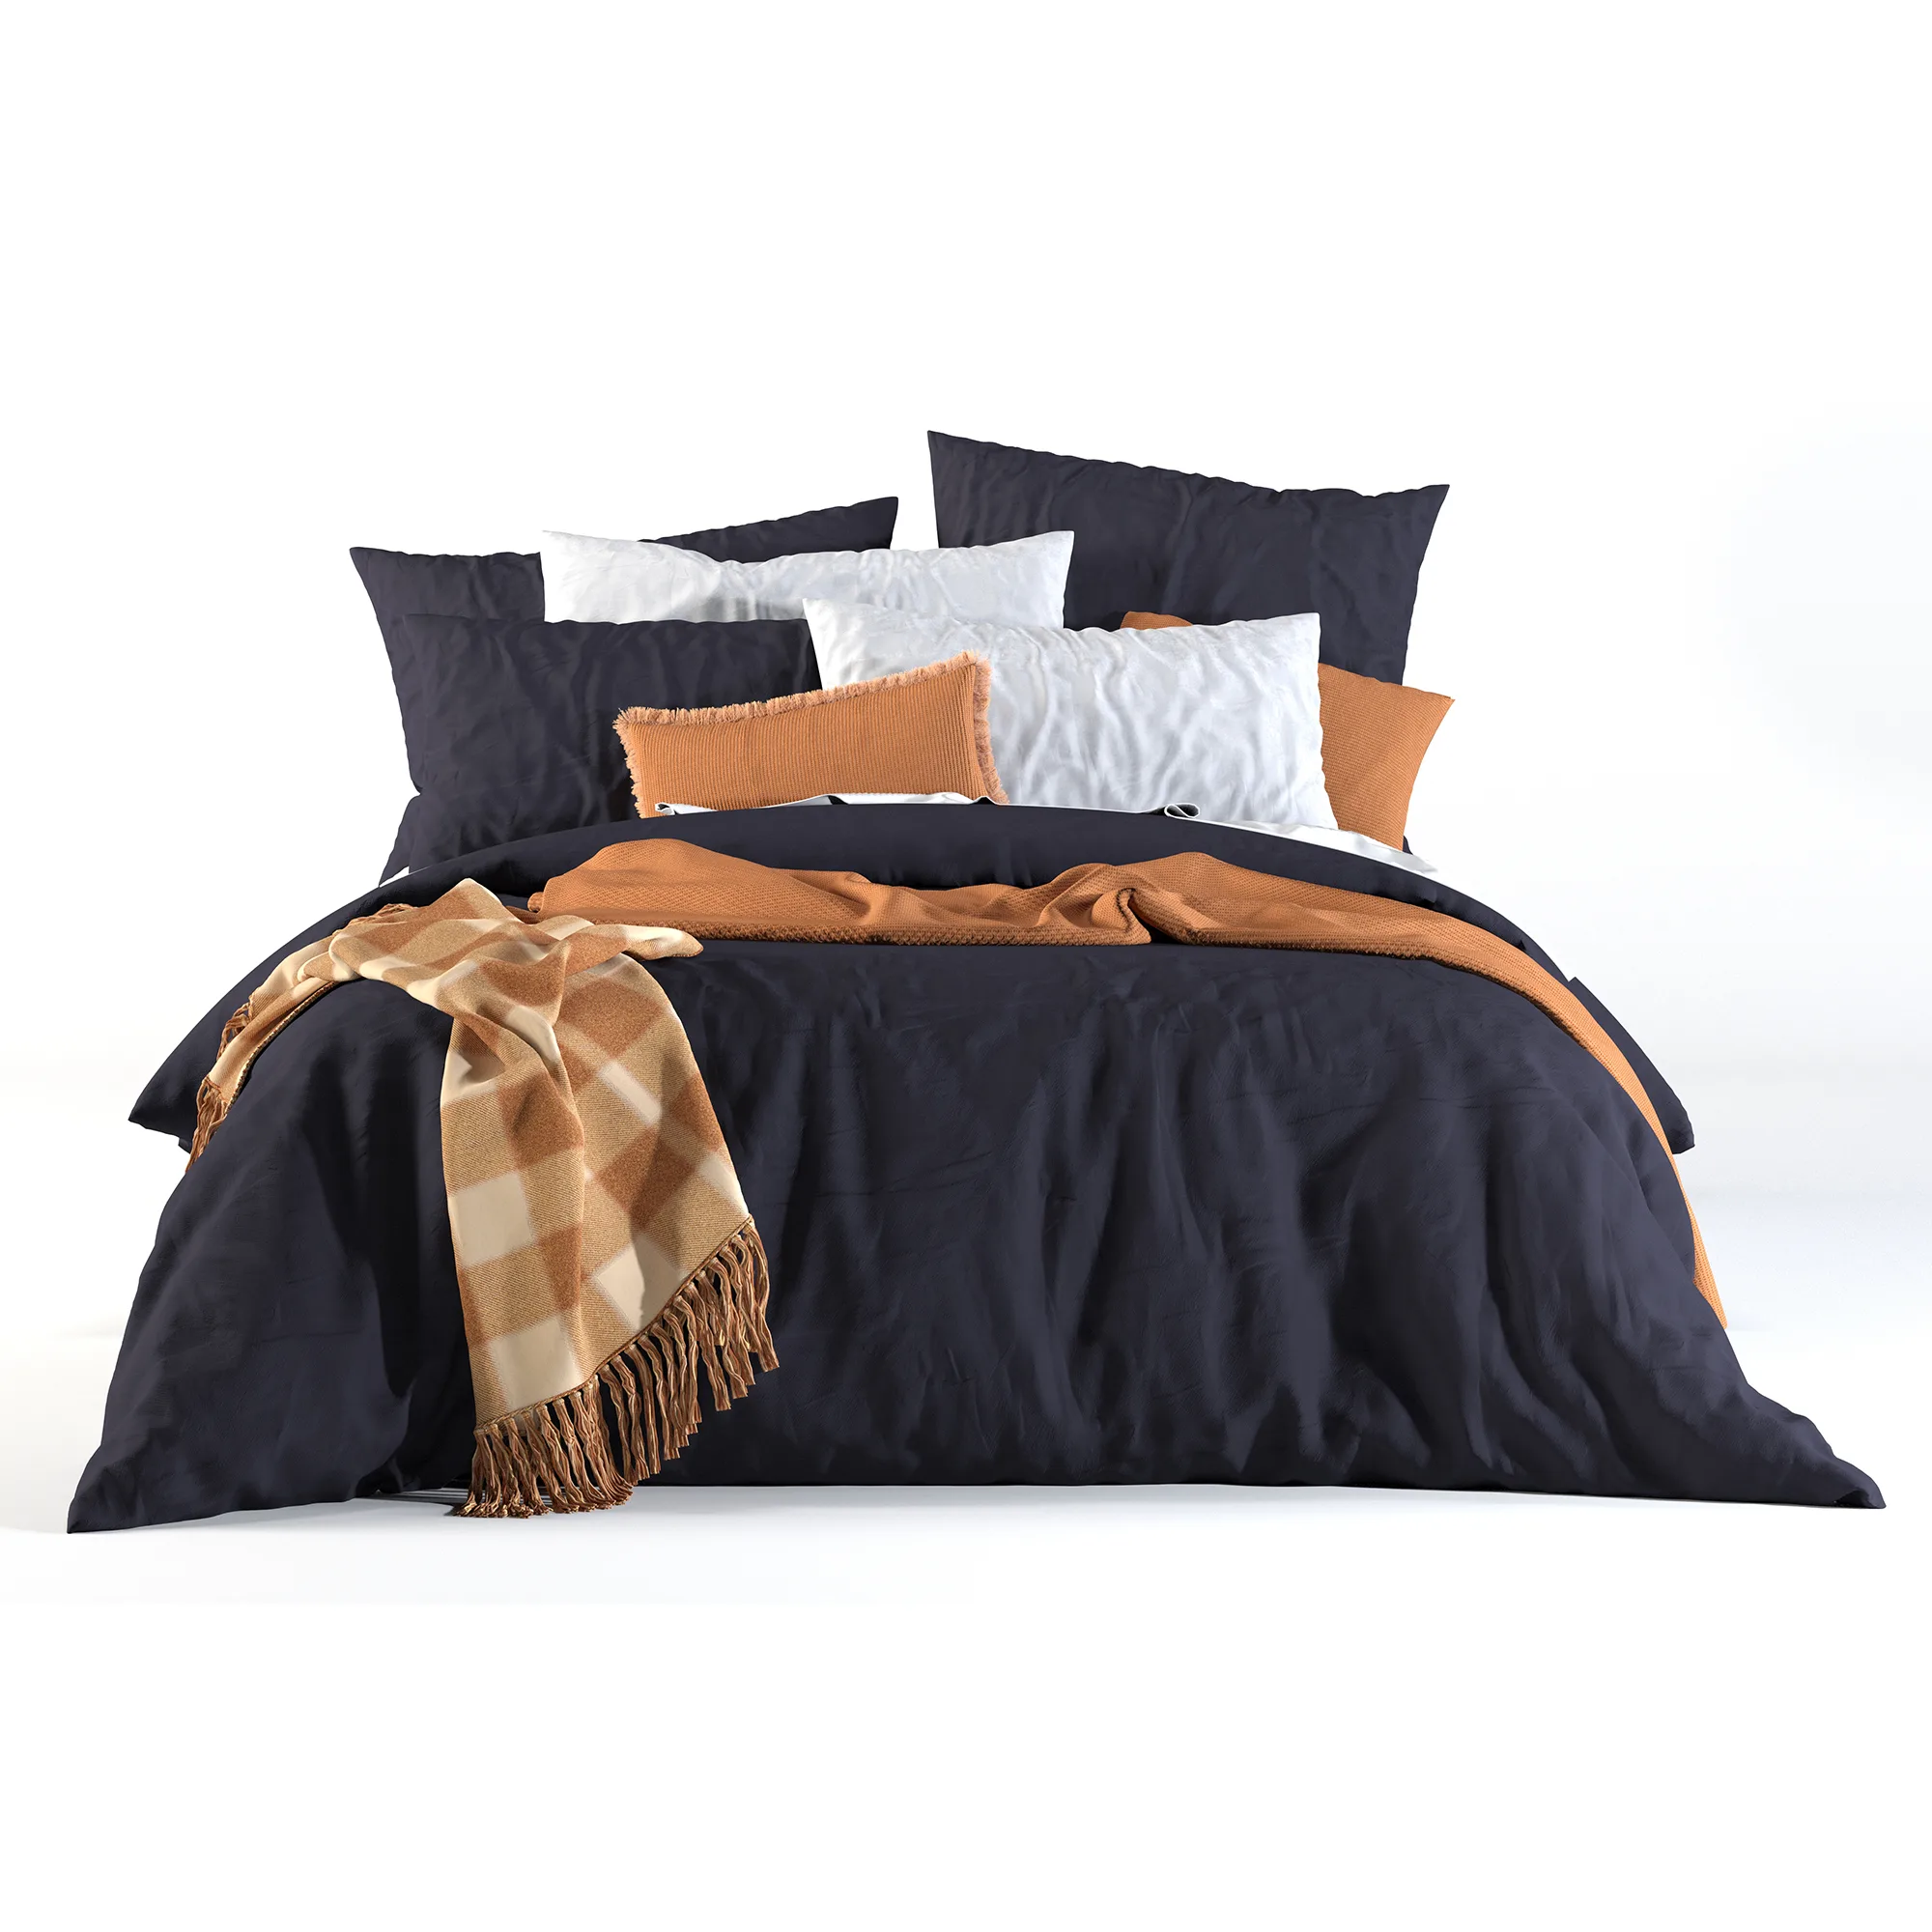 Adairs Bed #5 with Charcoal Quilt Cover Set